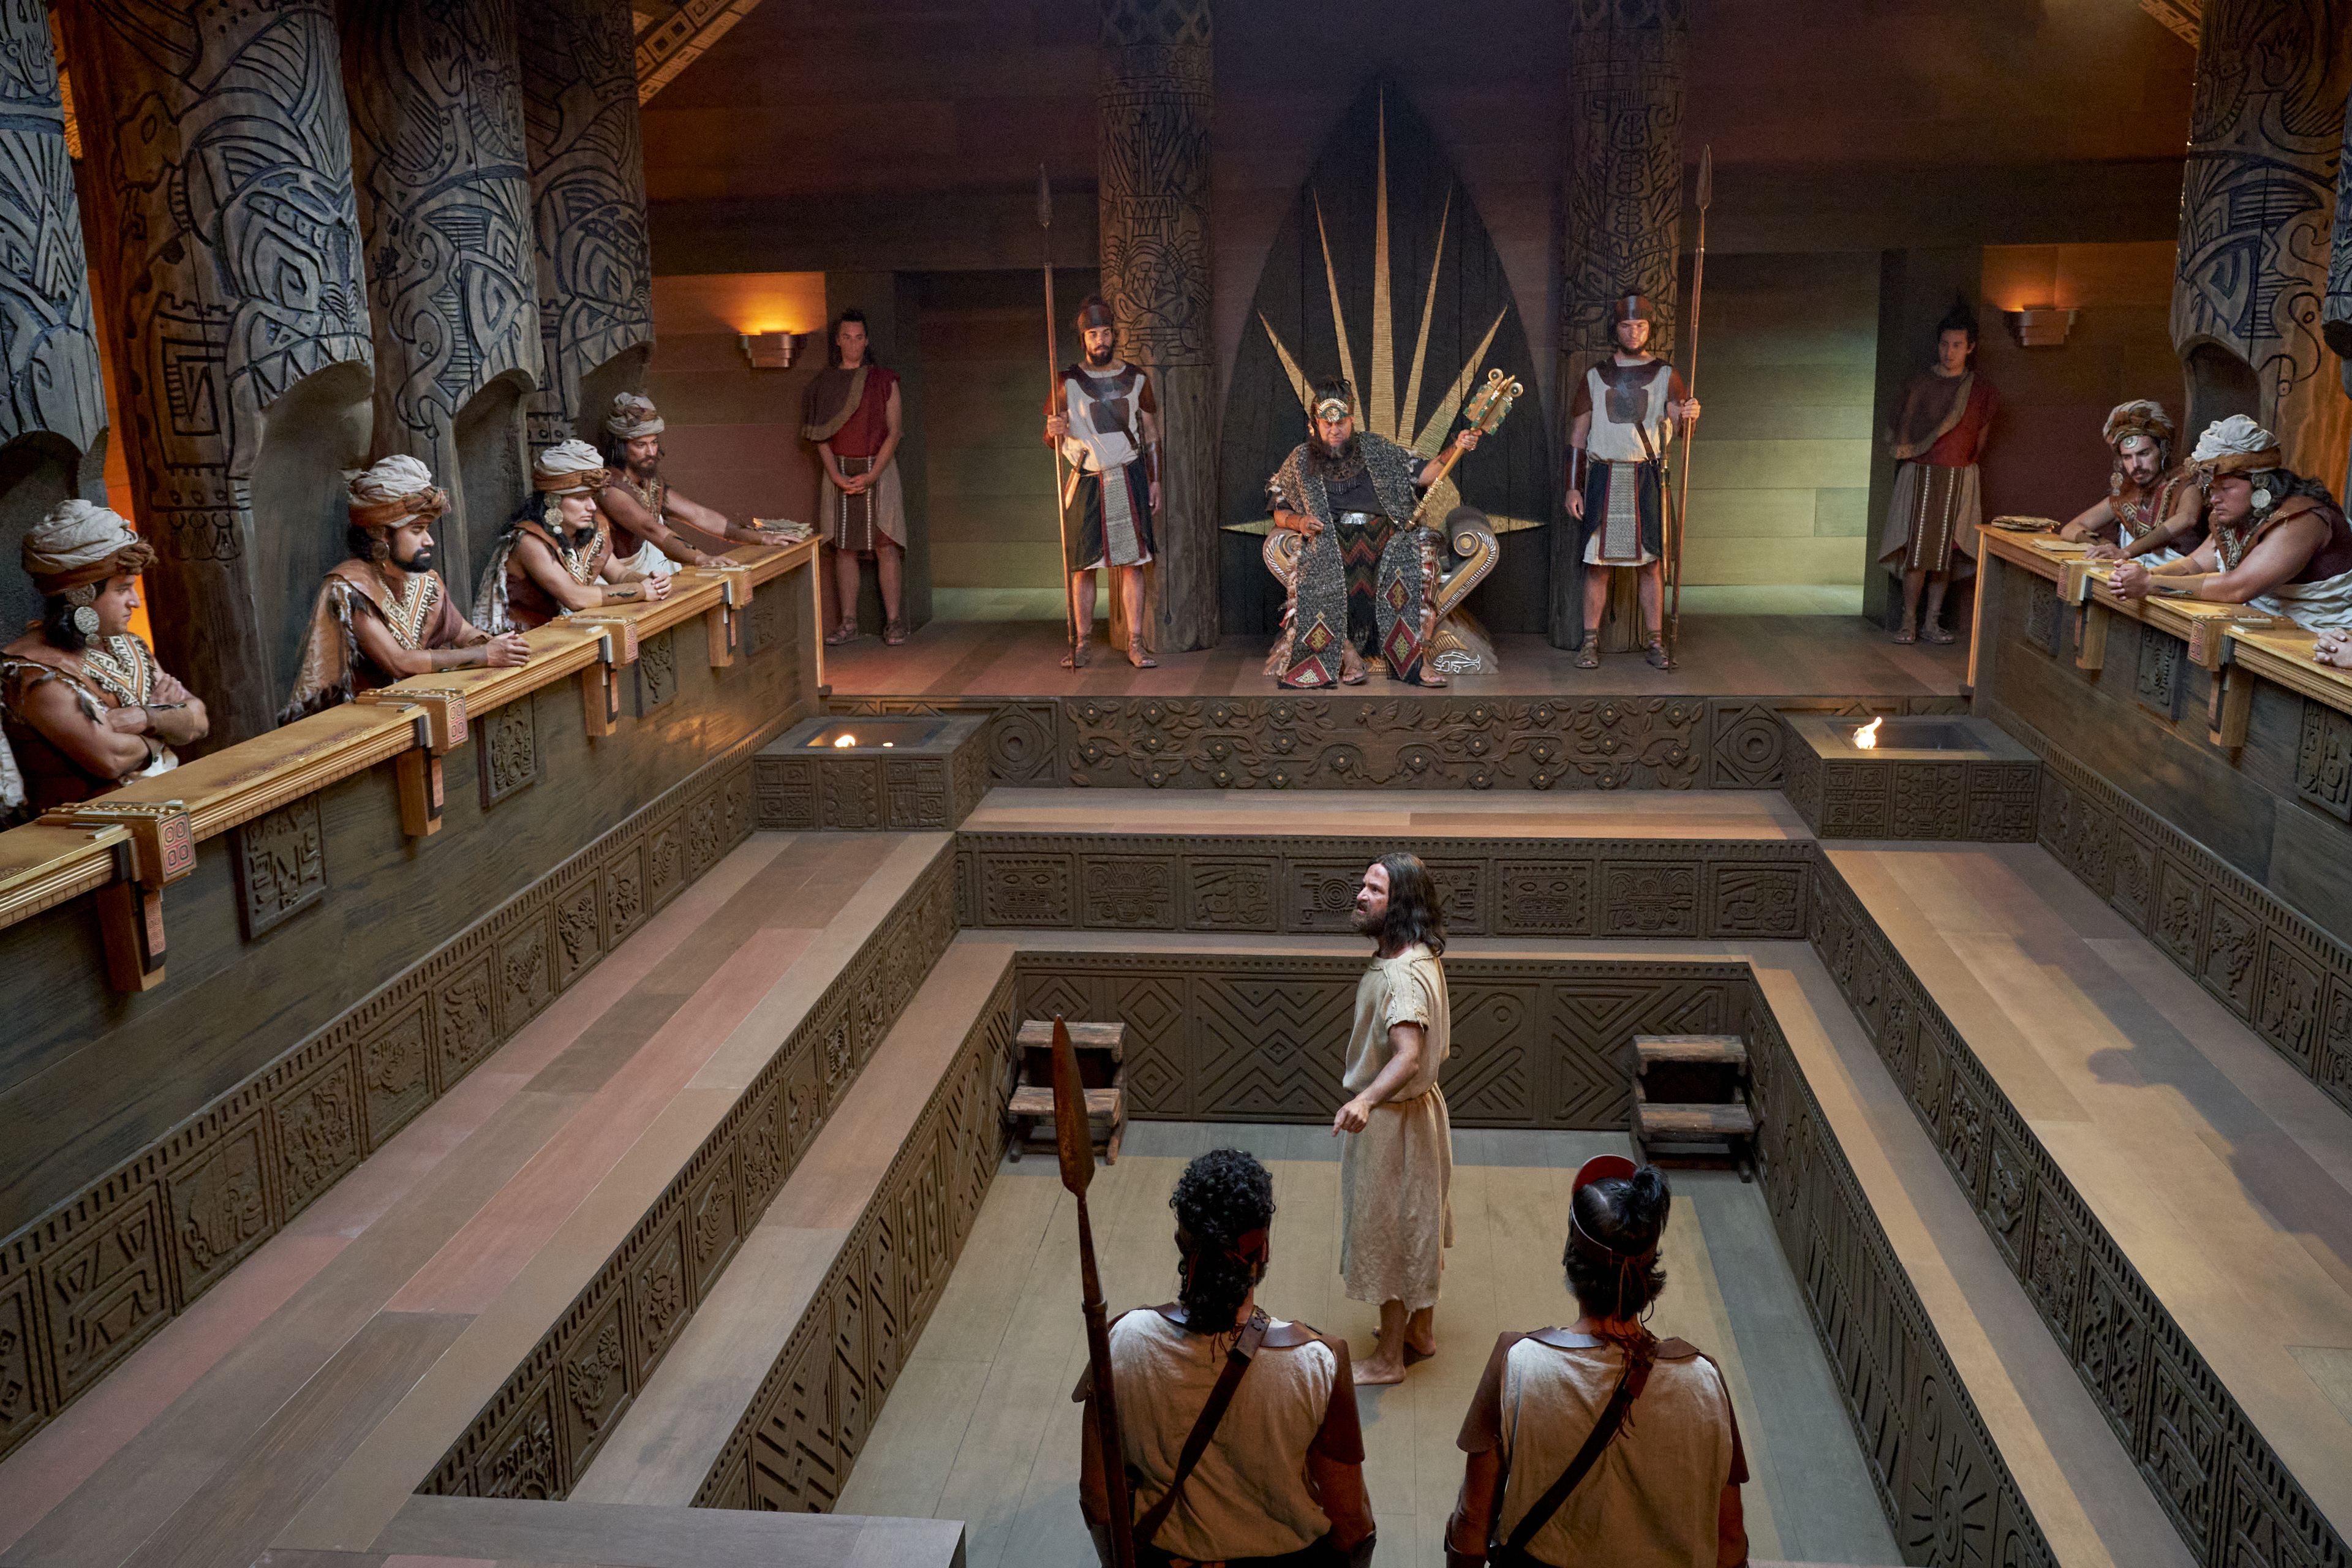 Abinadi is questioned by priests before King Noah.